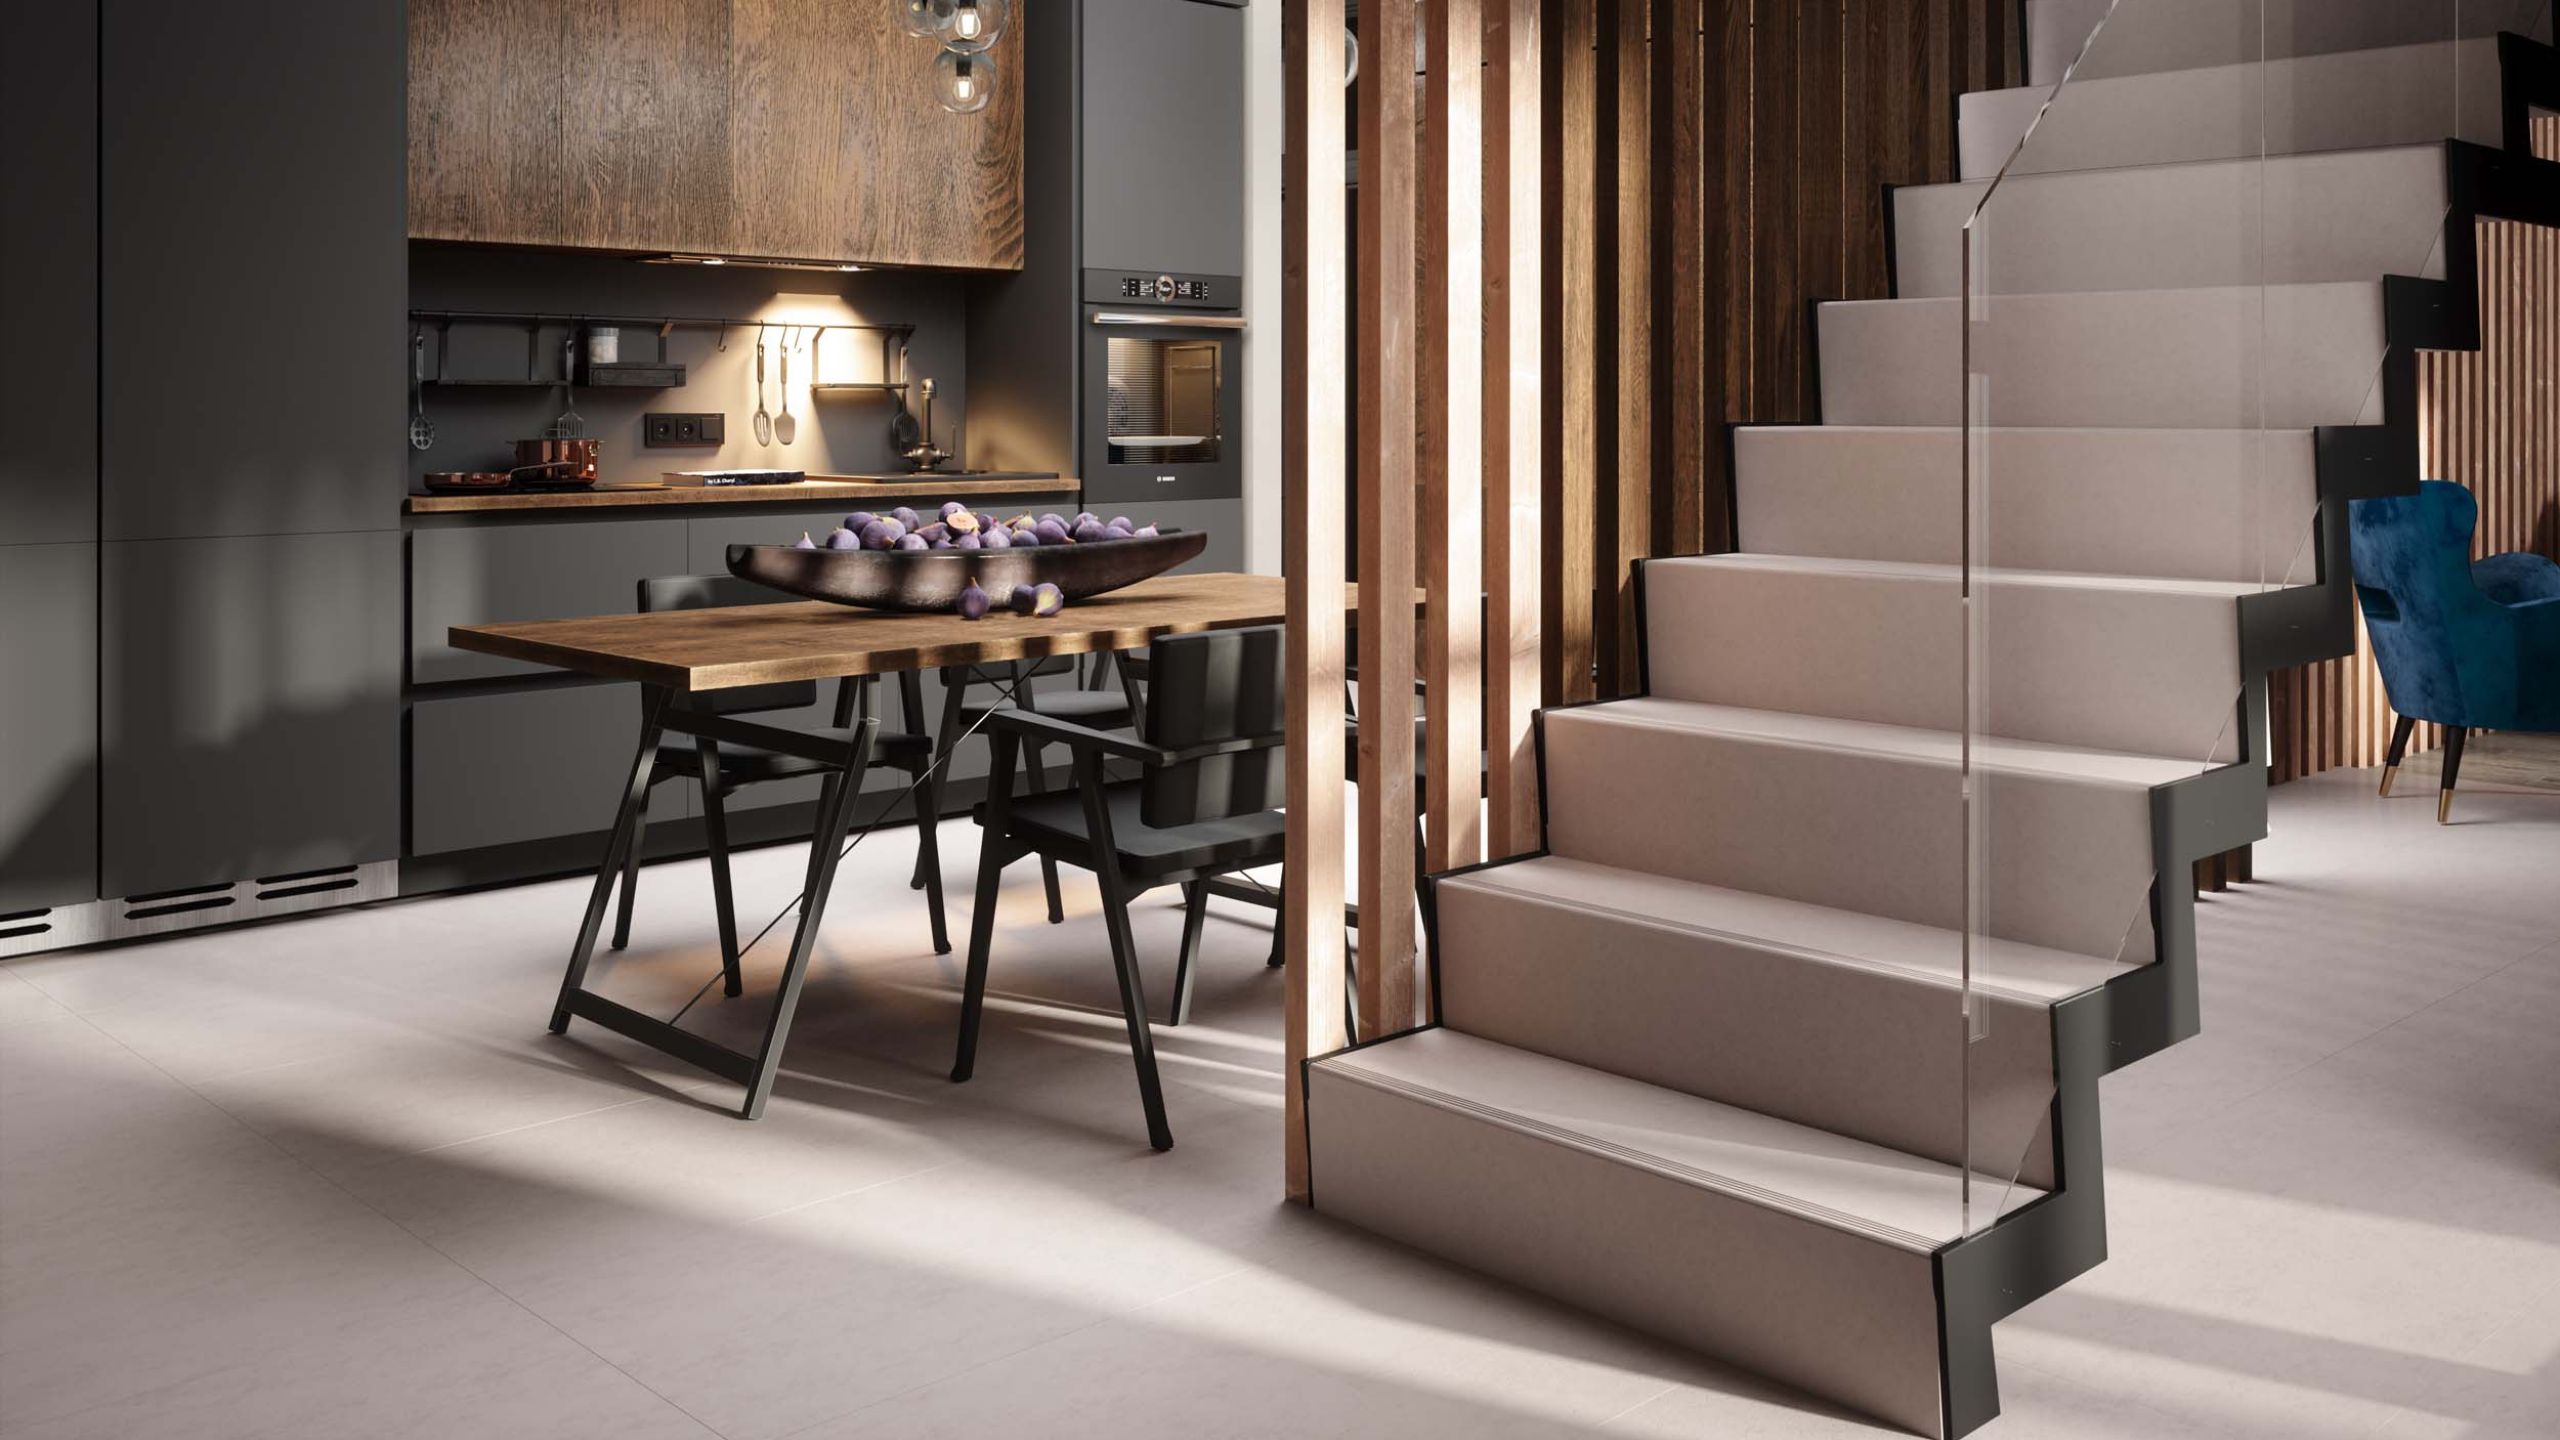 Staircase of porcelain stoneware for a country house: busting myths